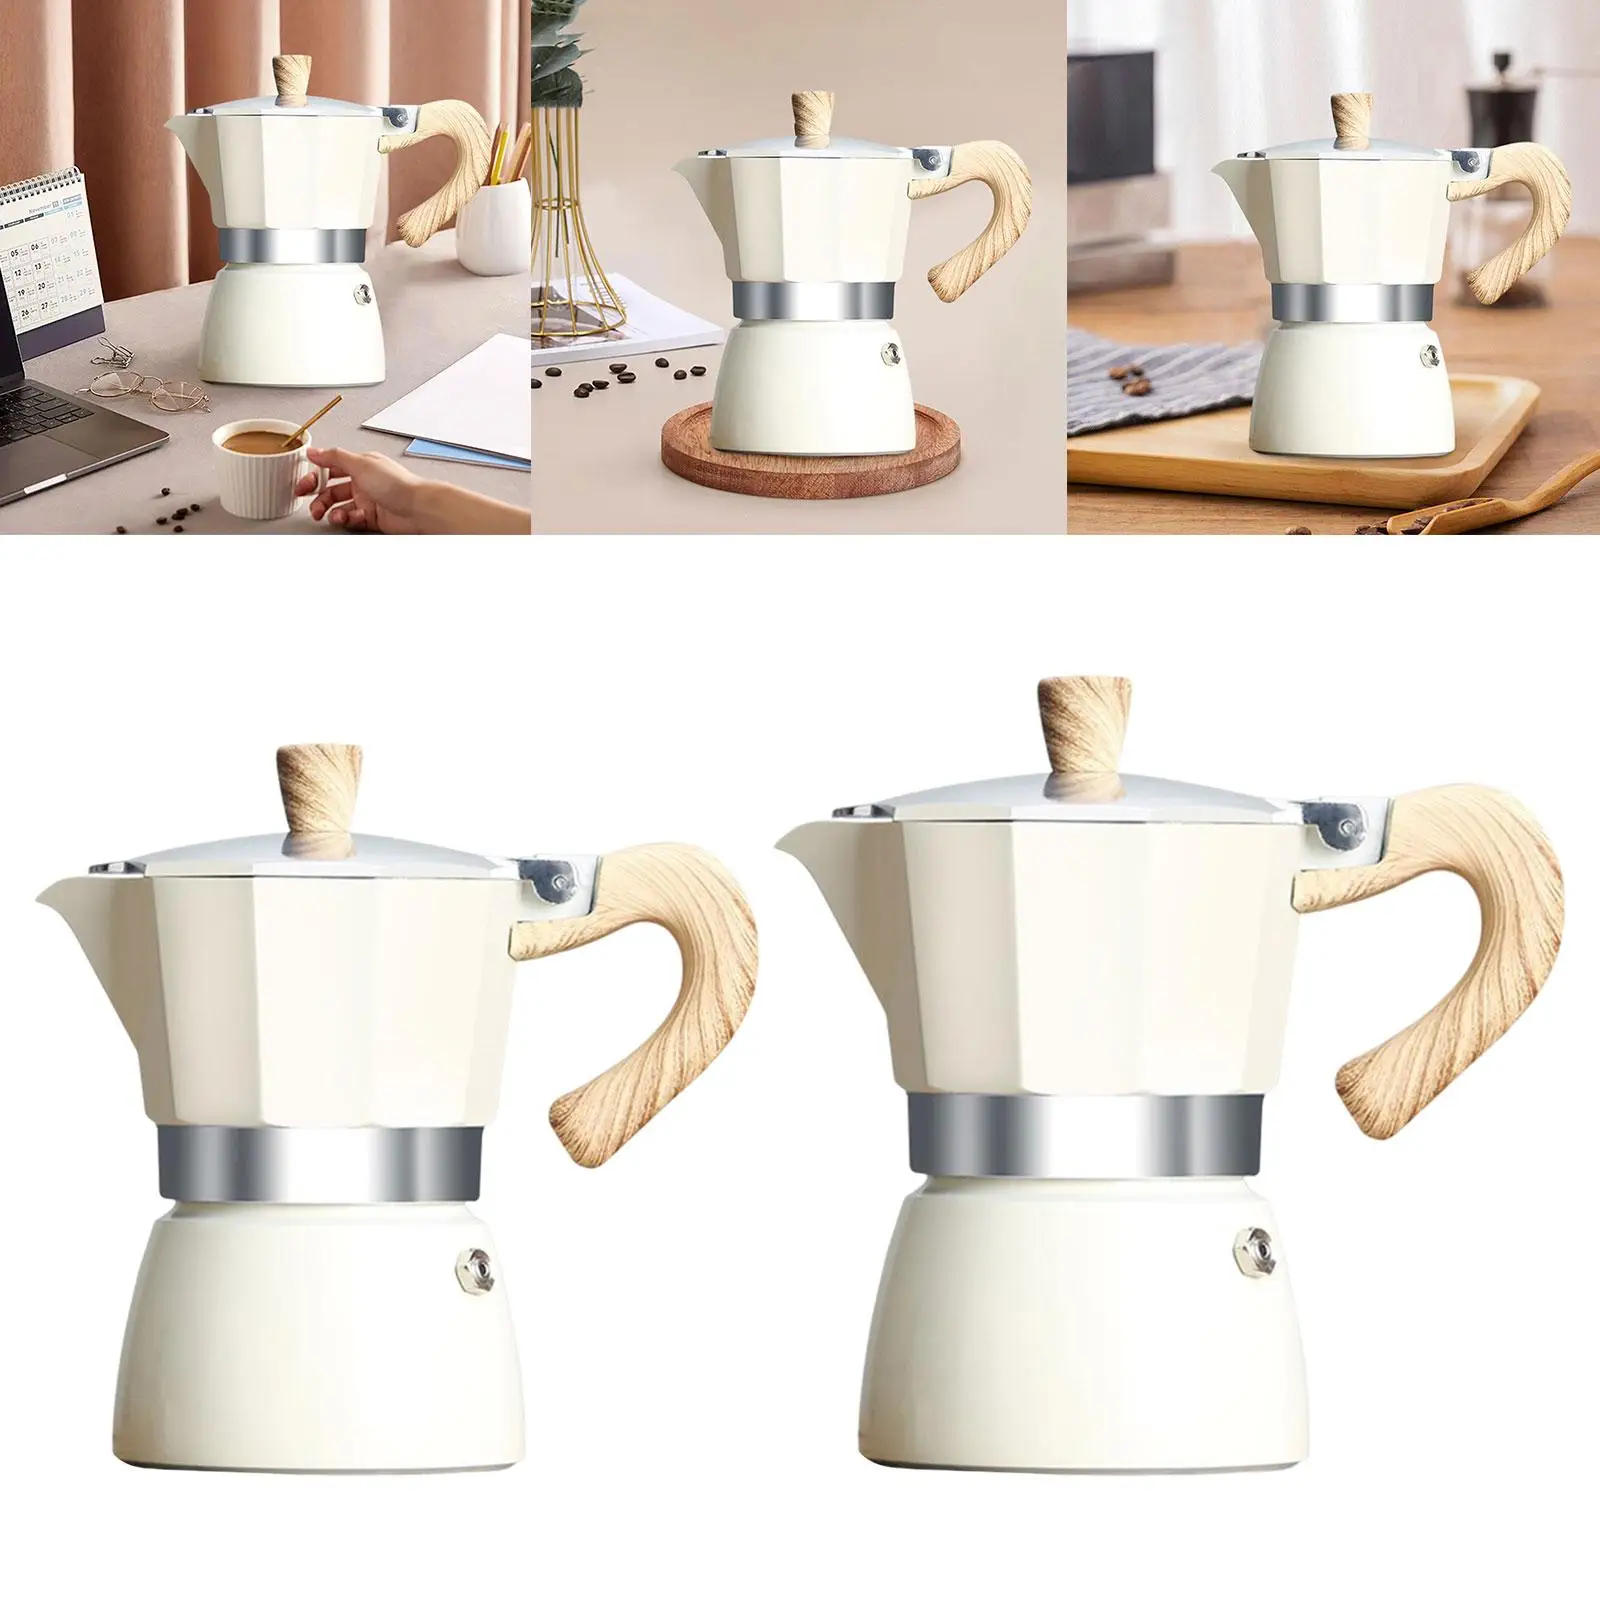 Espresso Maker Pot Kitchen Tools Coffee Maker Pot Coffee Maker Stovetop for Restaurant Office Outdoor Camping Cafe